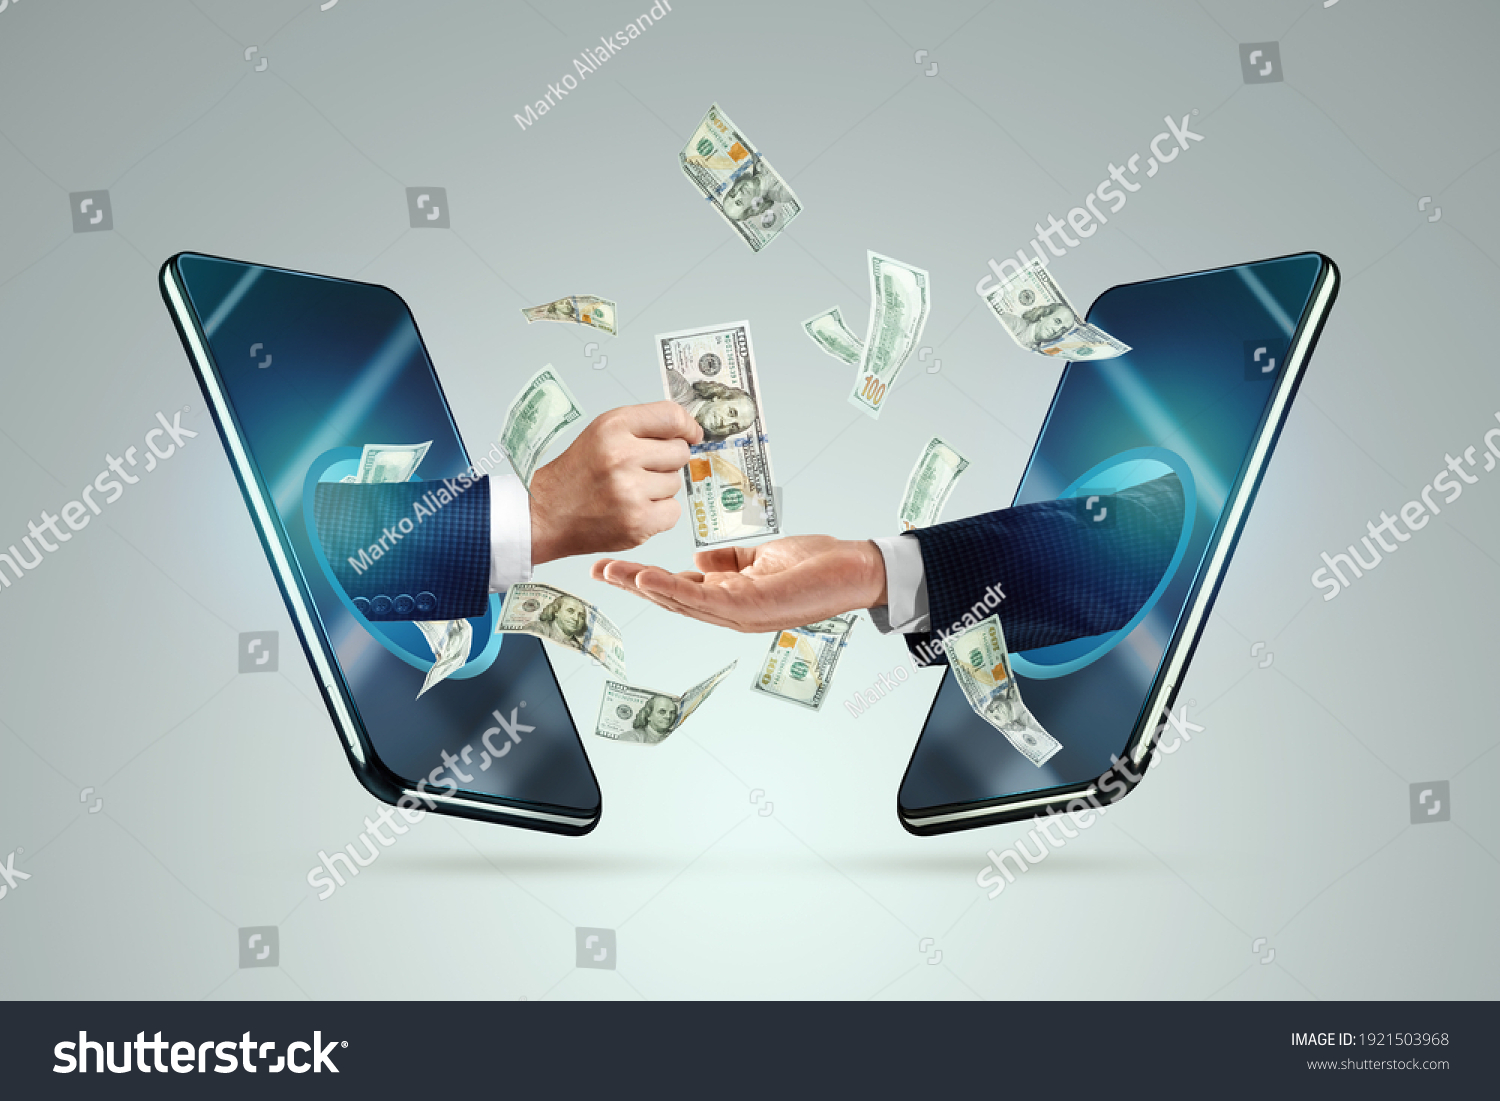 Hand from a smartphone transfers money to another hand. Online money transactions, mobile payments using a smartphone. Concept Financial growth, passive income, online business, dividends #1921503968